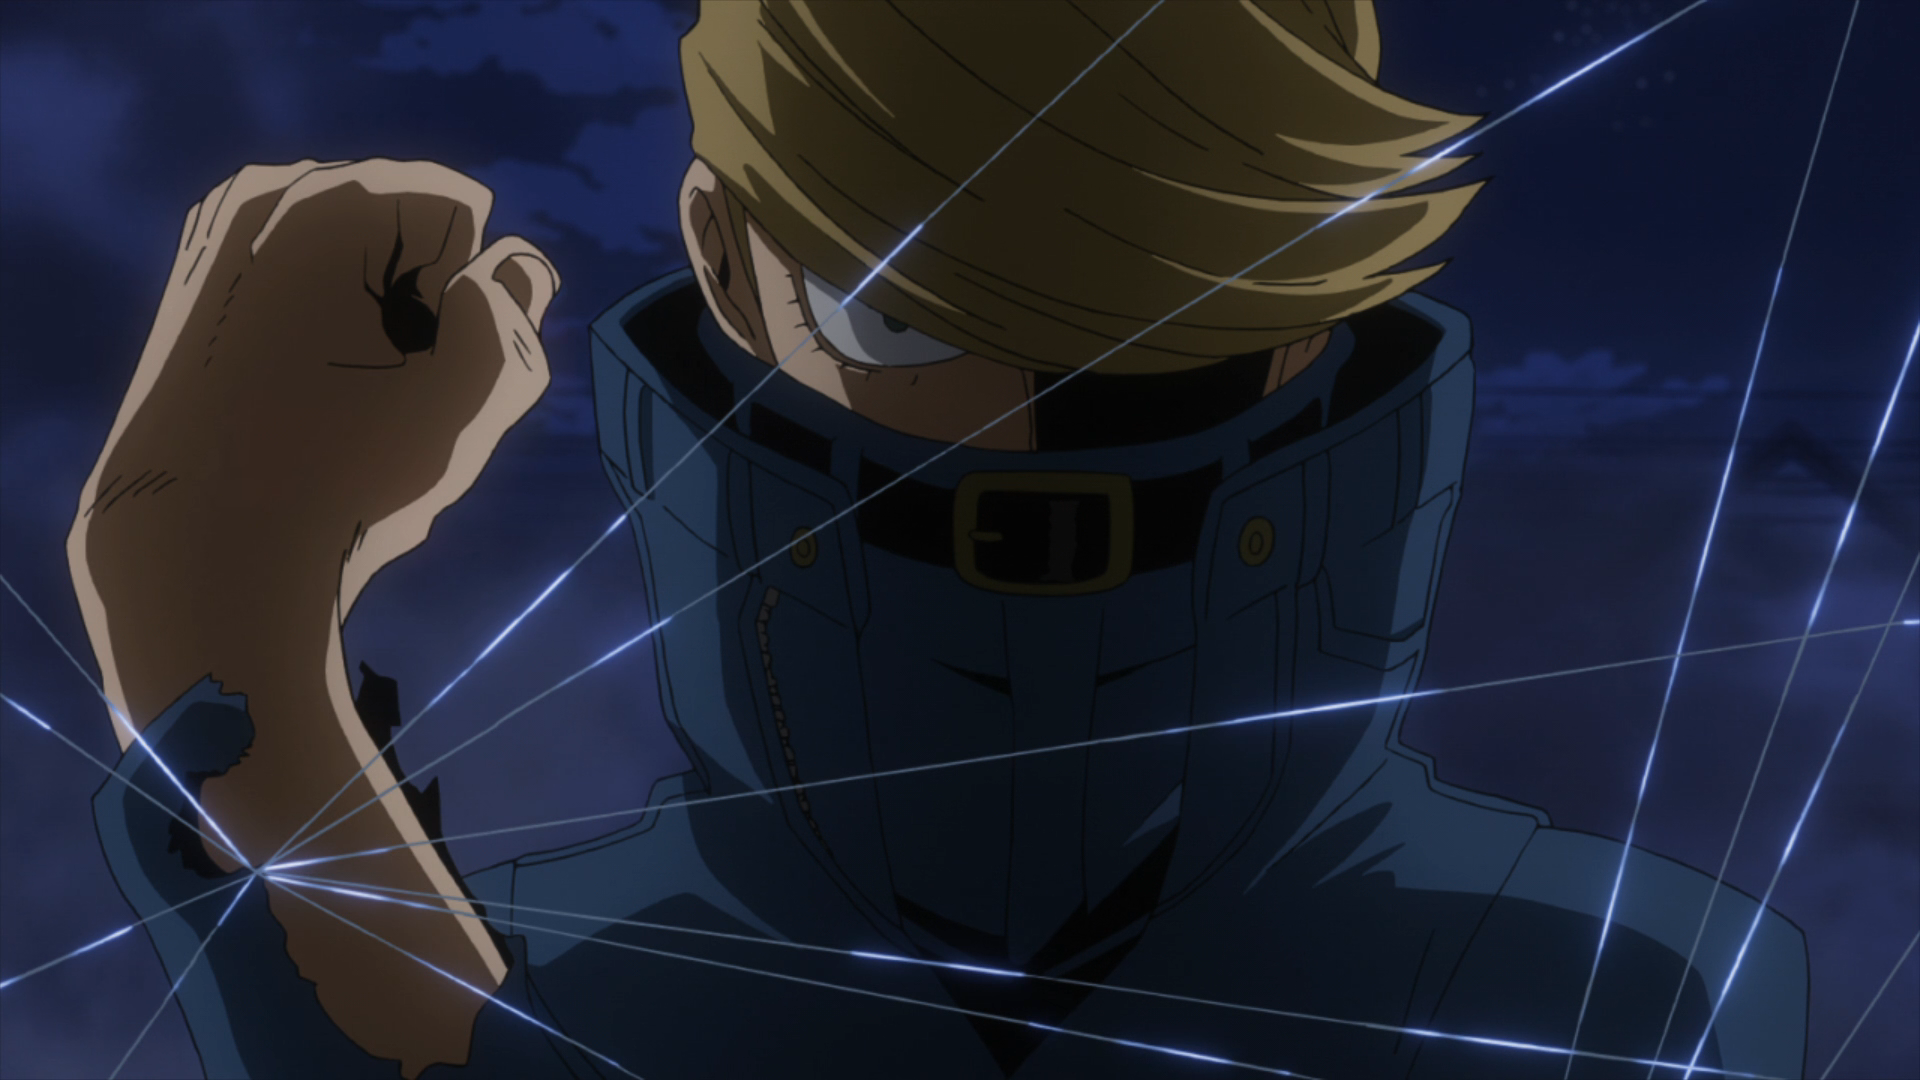 In My Hero Academia, best Jeanist is the current number three hero, and is considered to be an elite fighter, even All For One acknowledged his skill as a fighter, which says